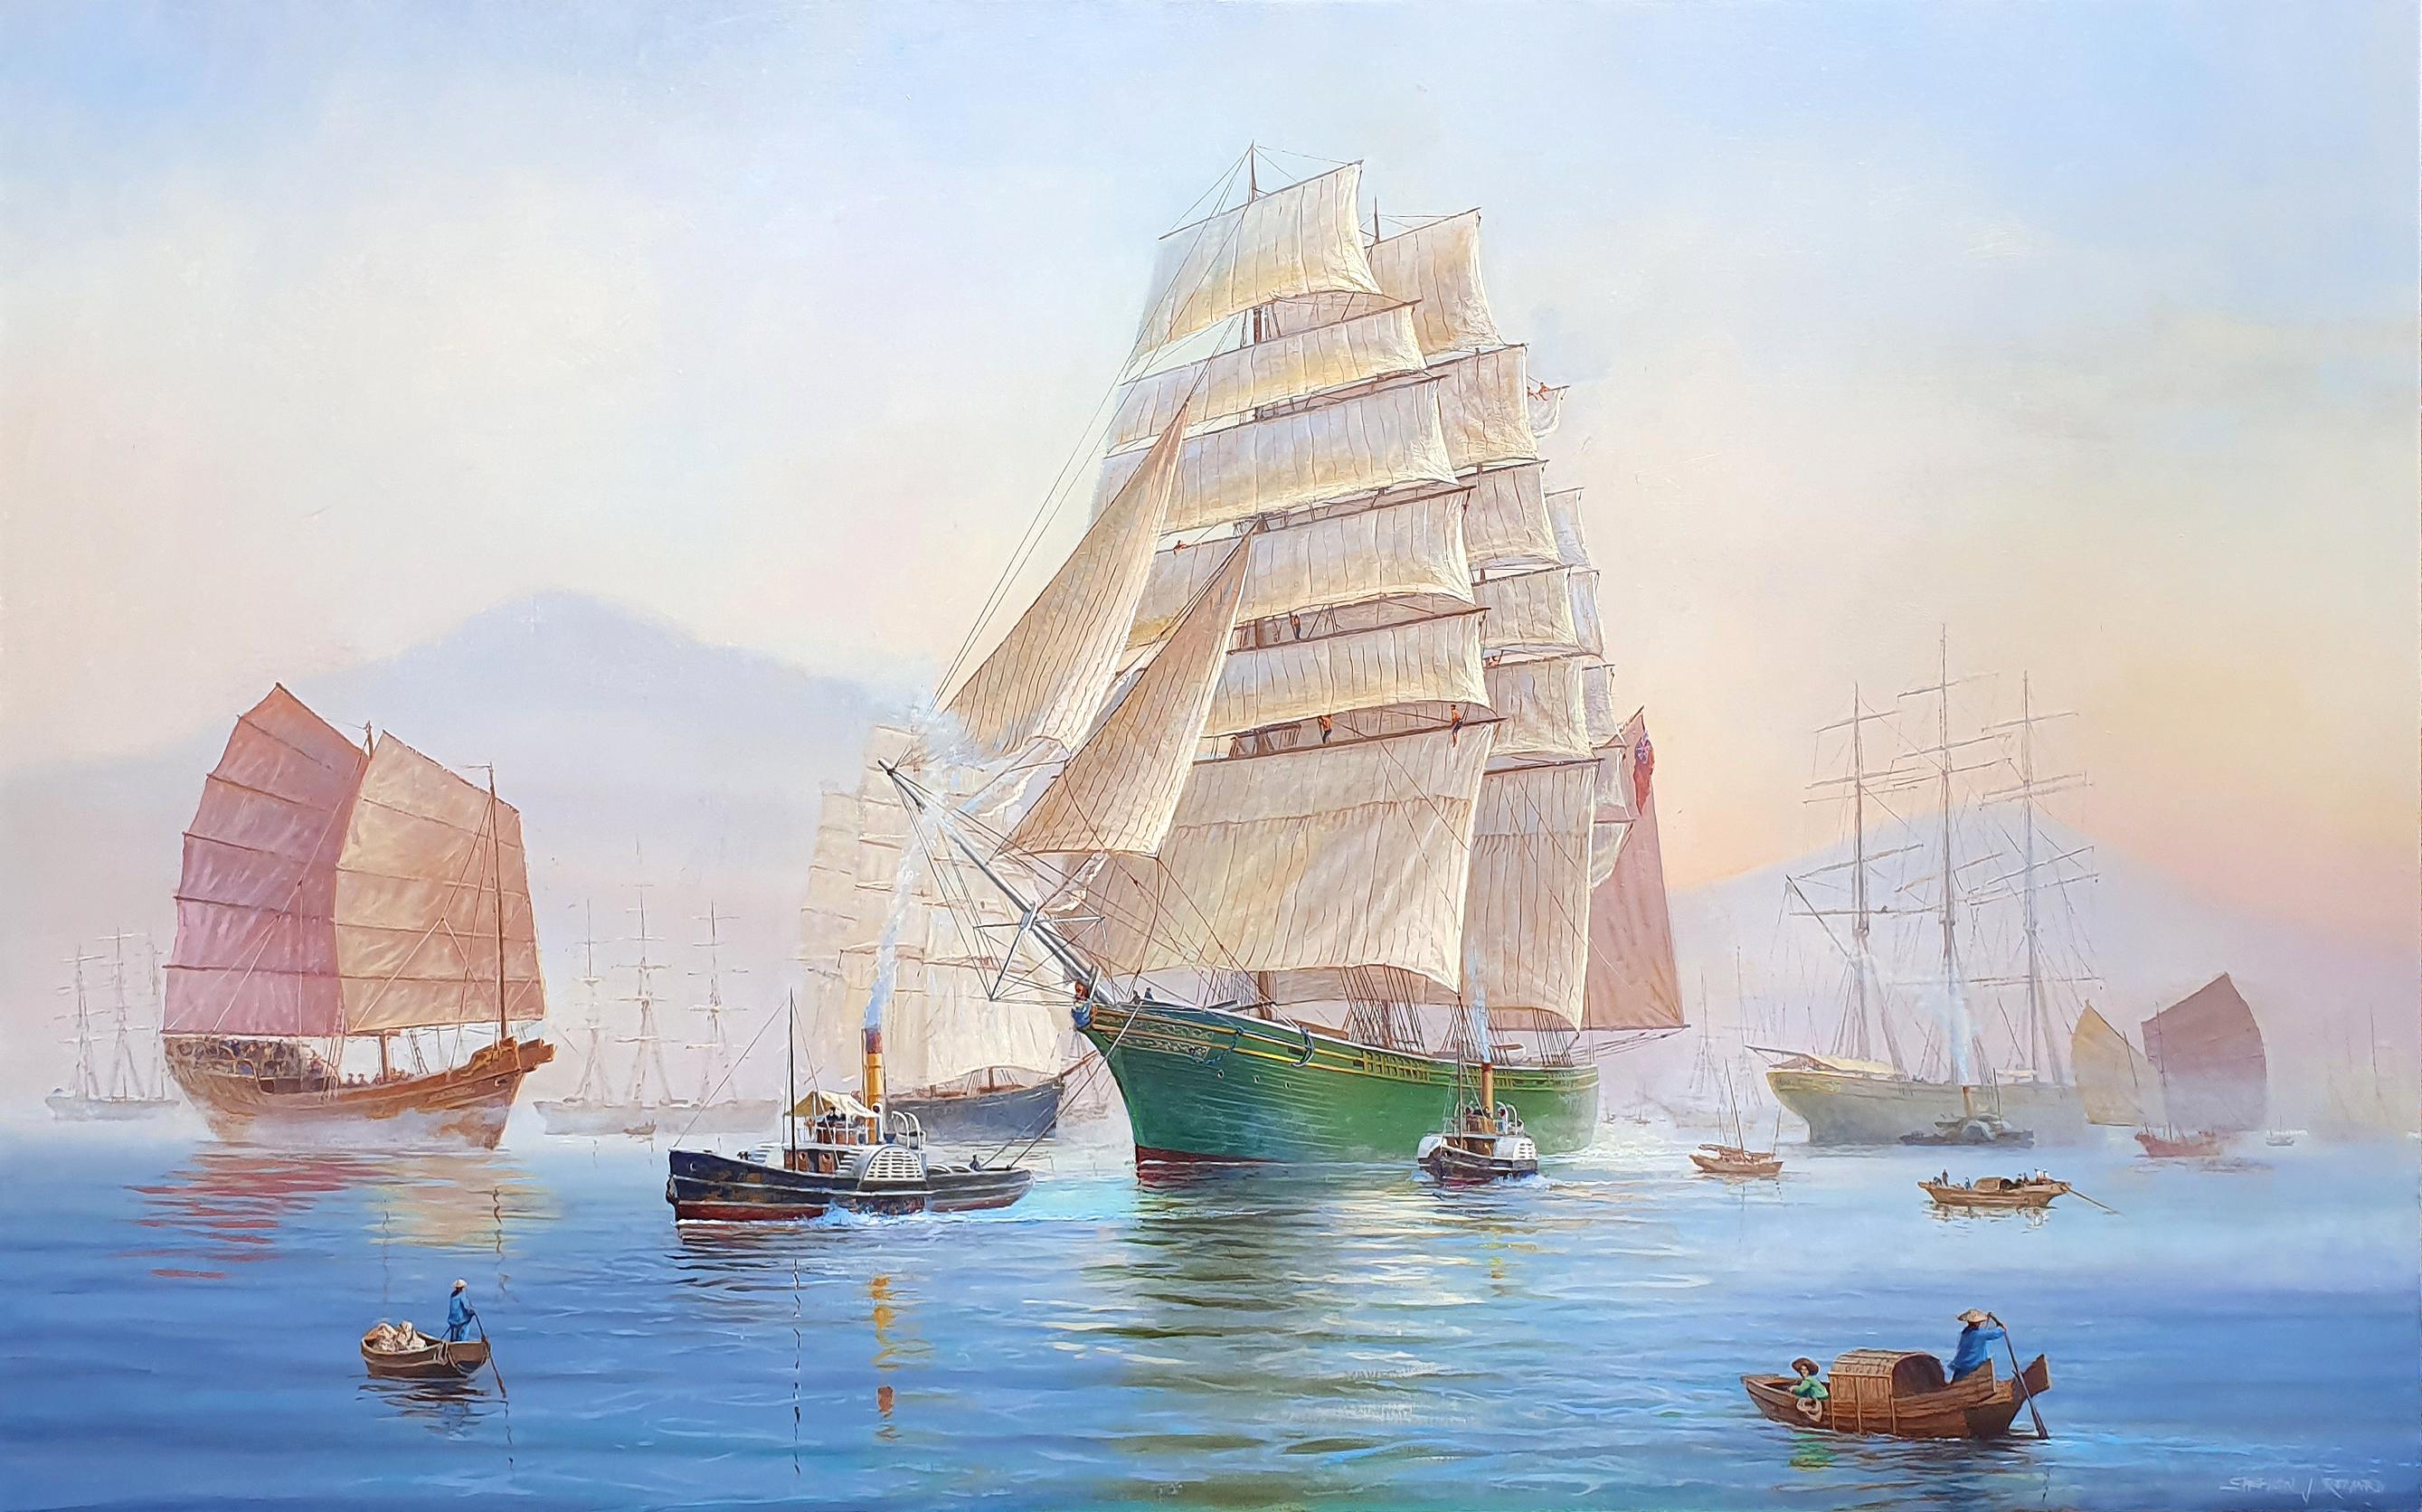 Clipper 'Thermopylae' leaving Fuchow at Dawn - Painting by Stephen J. Renard